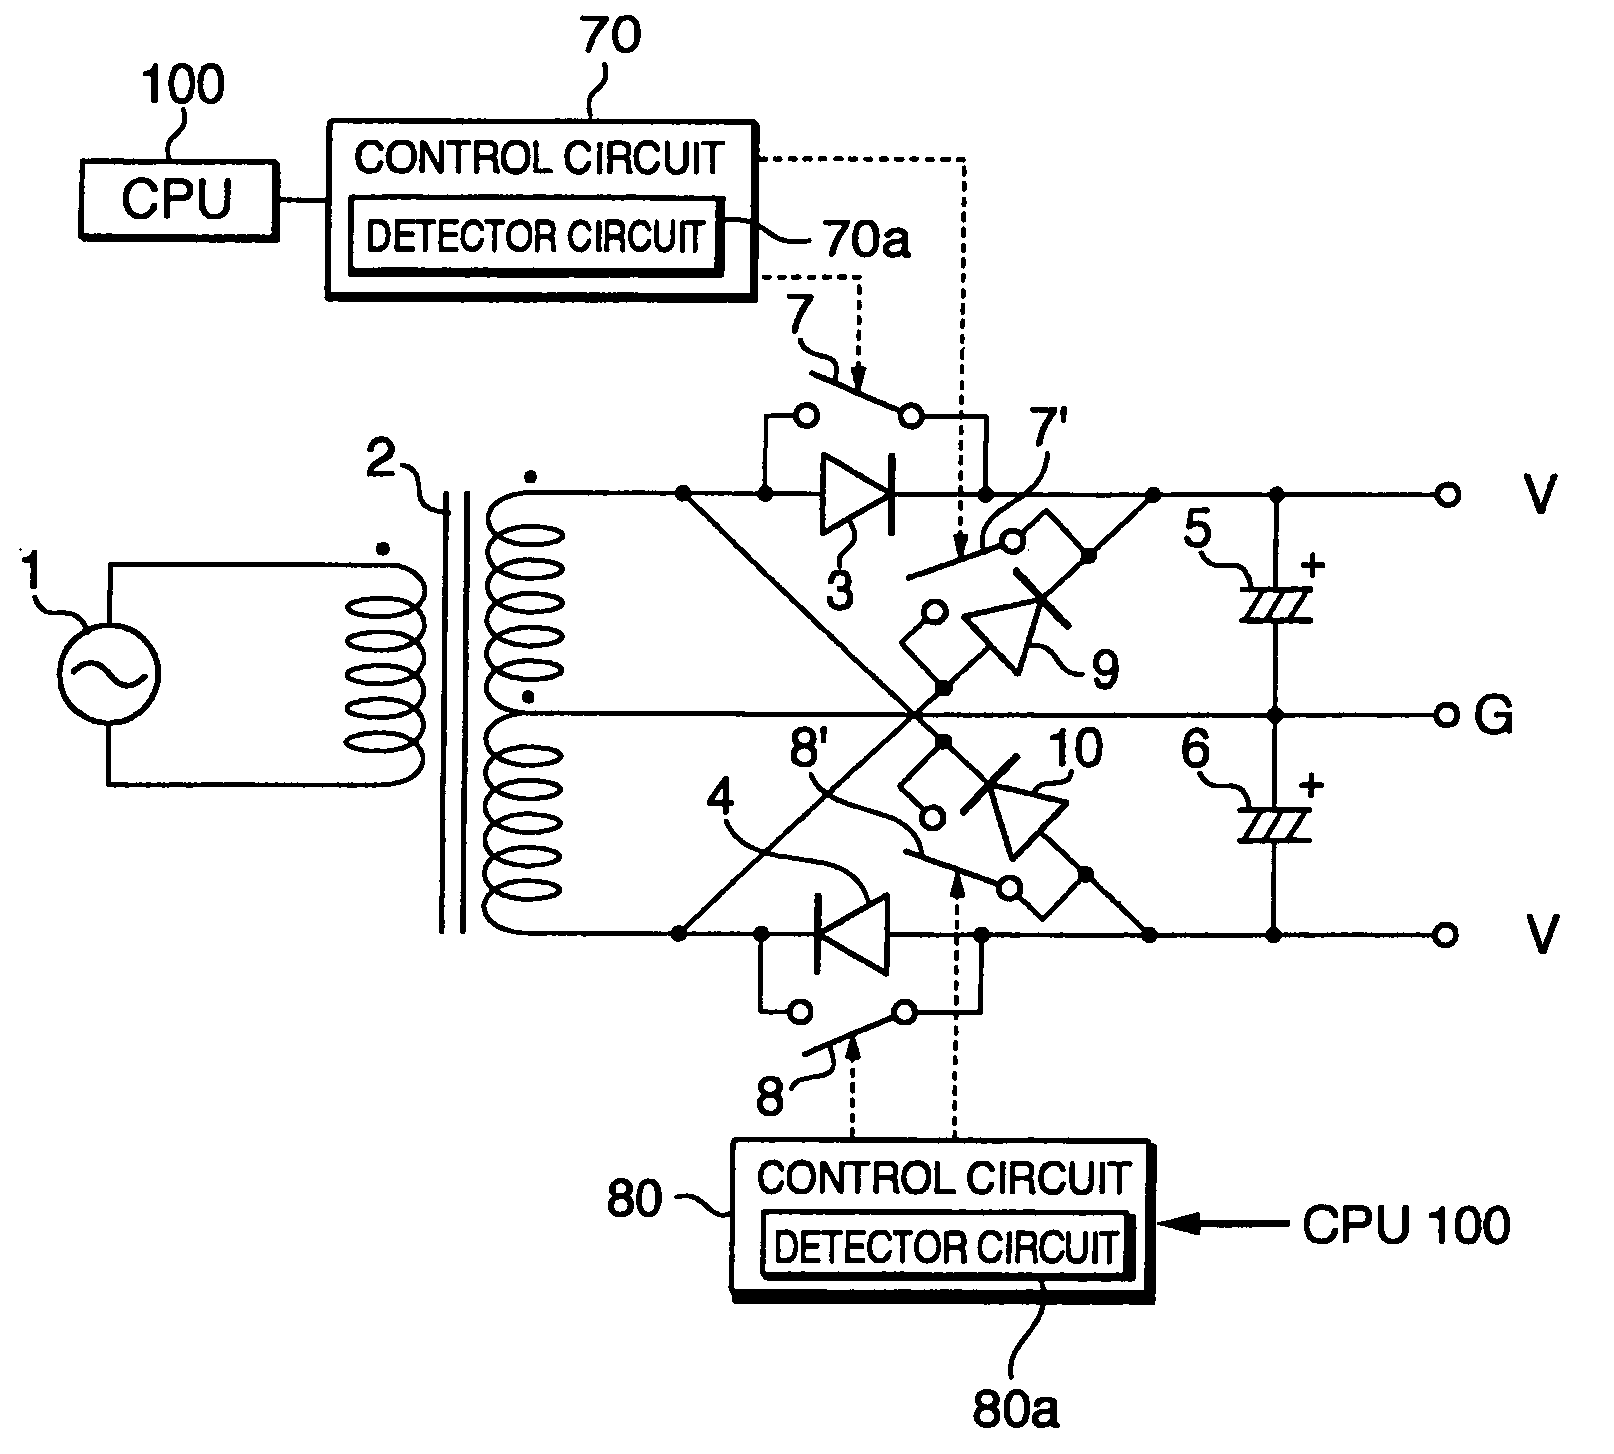 Capacitor-input positive and negative power supply circuit